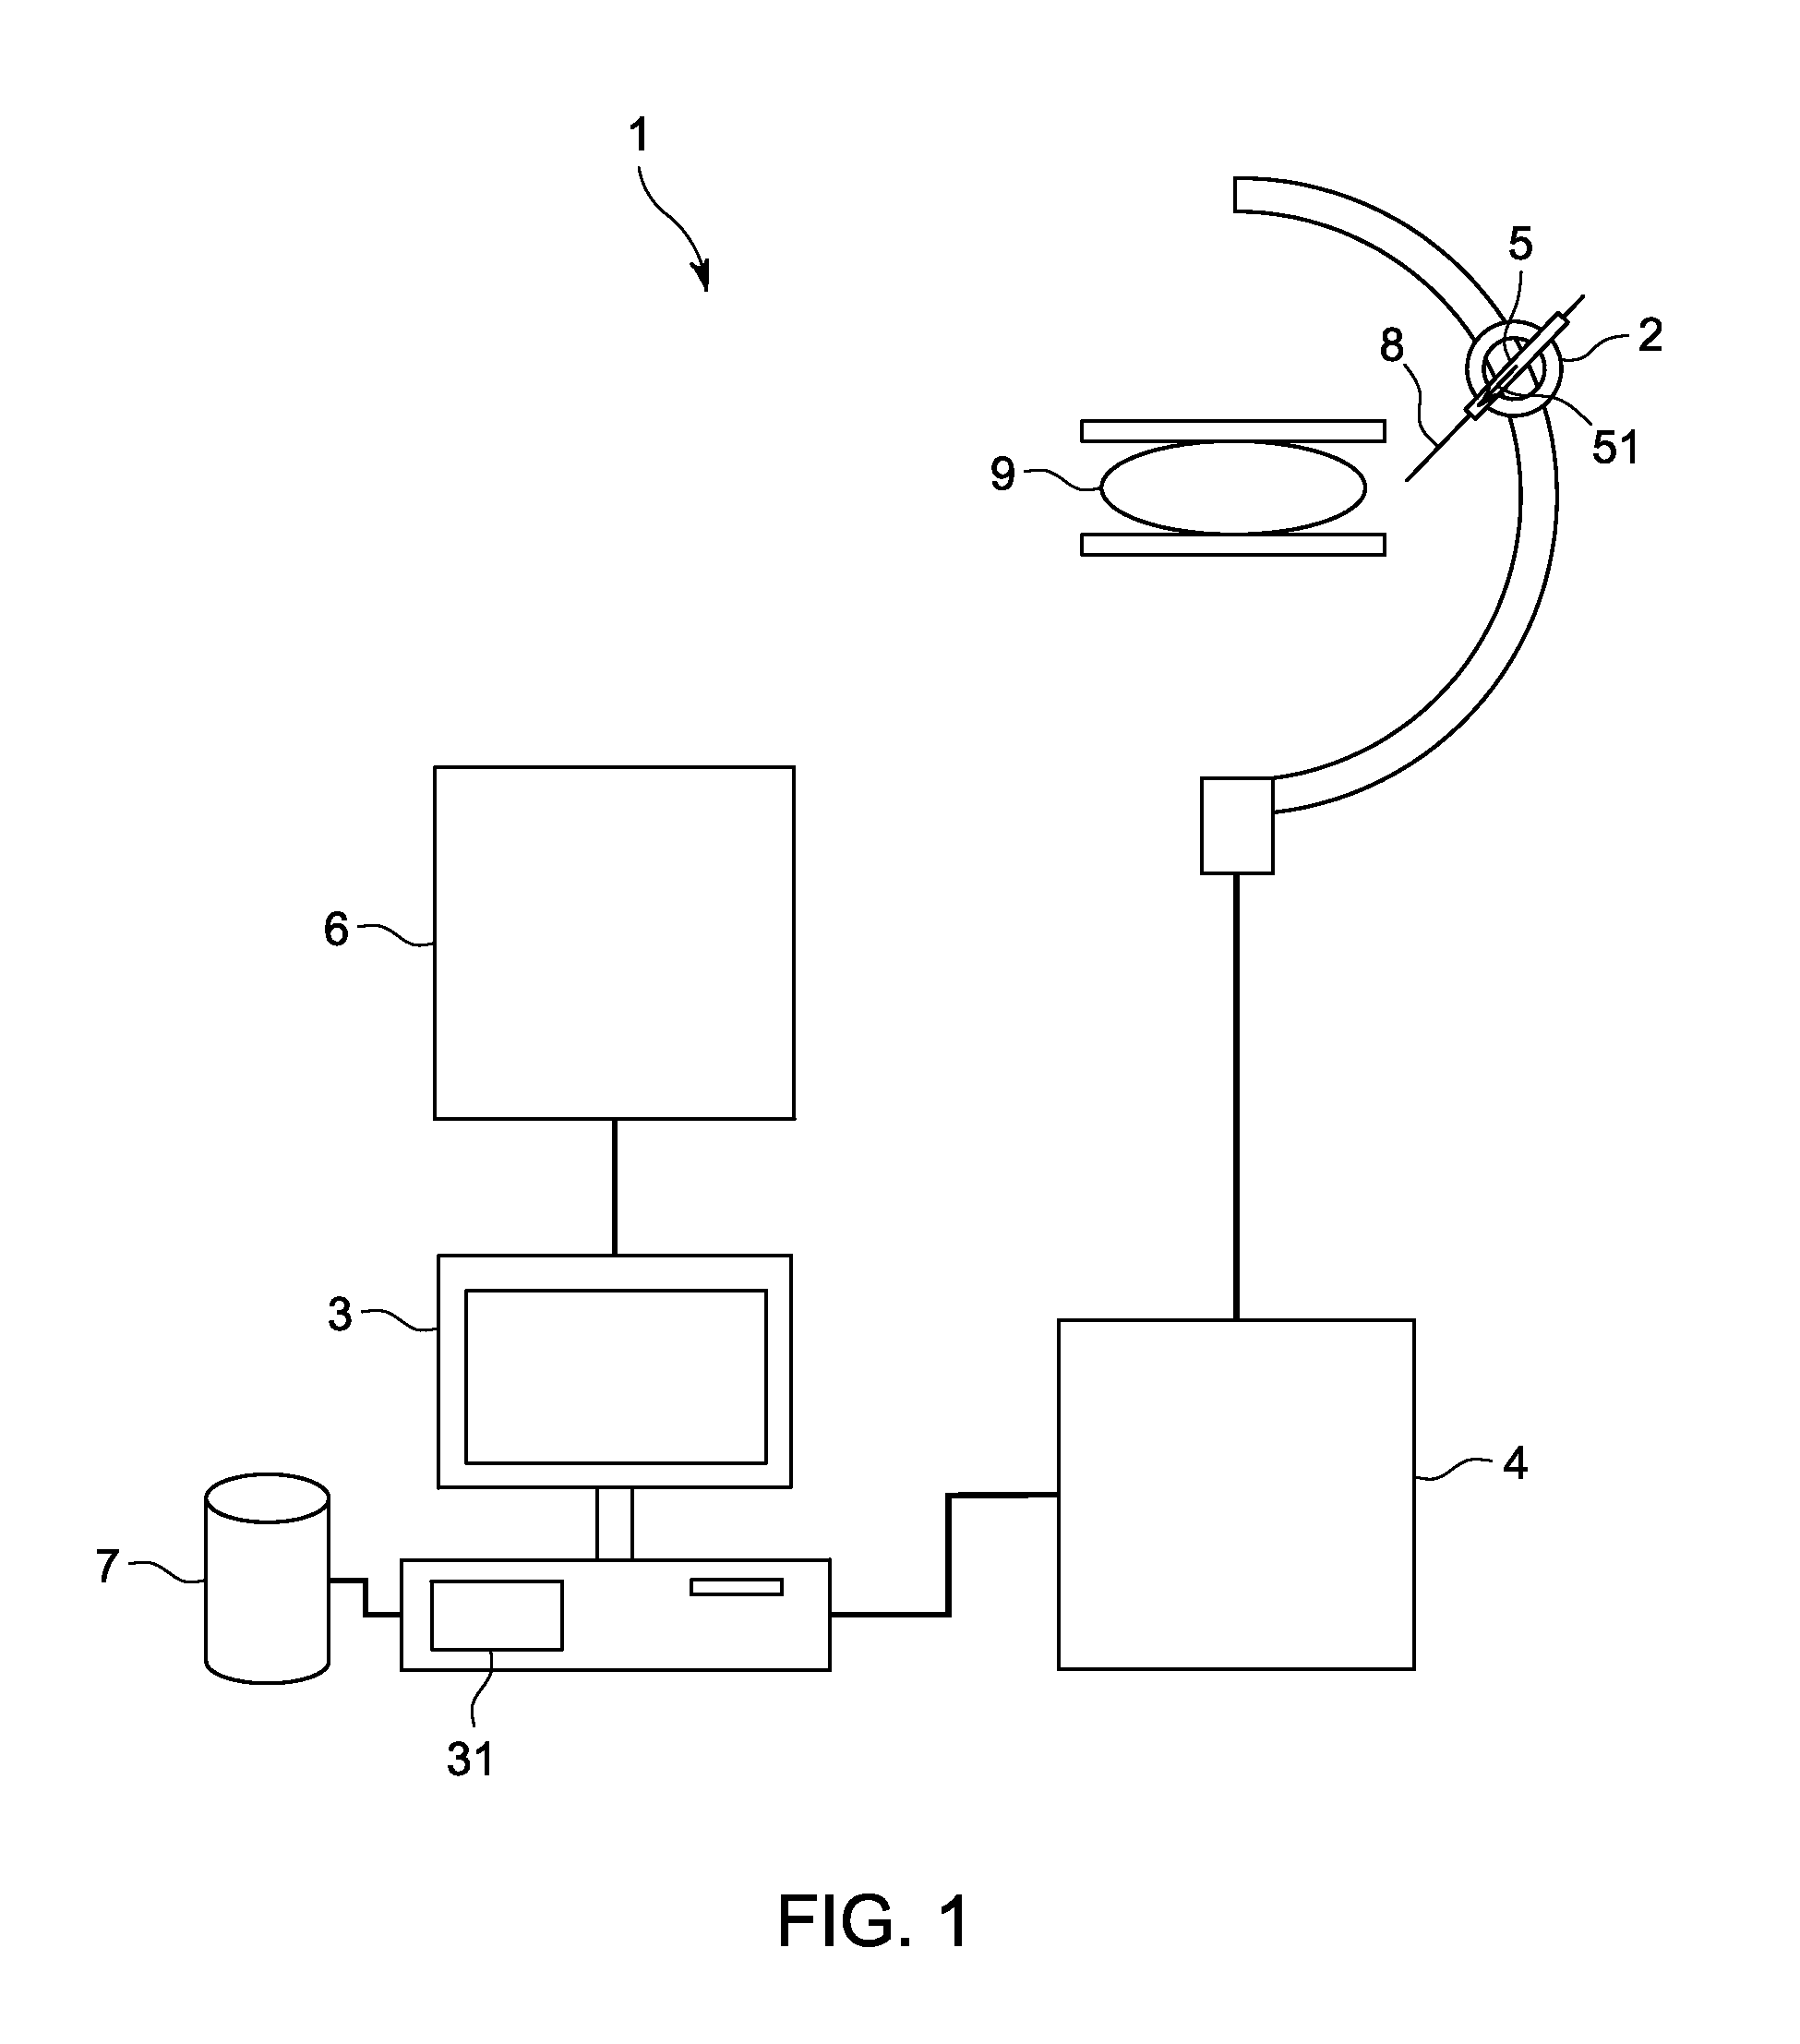 Method for determining an insertion trajectory of a tool in a deformable tissular matrix and robotic system executing the method